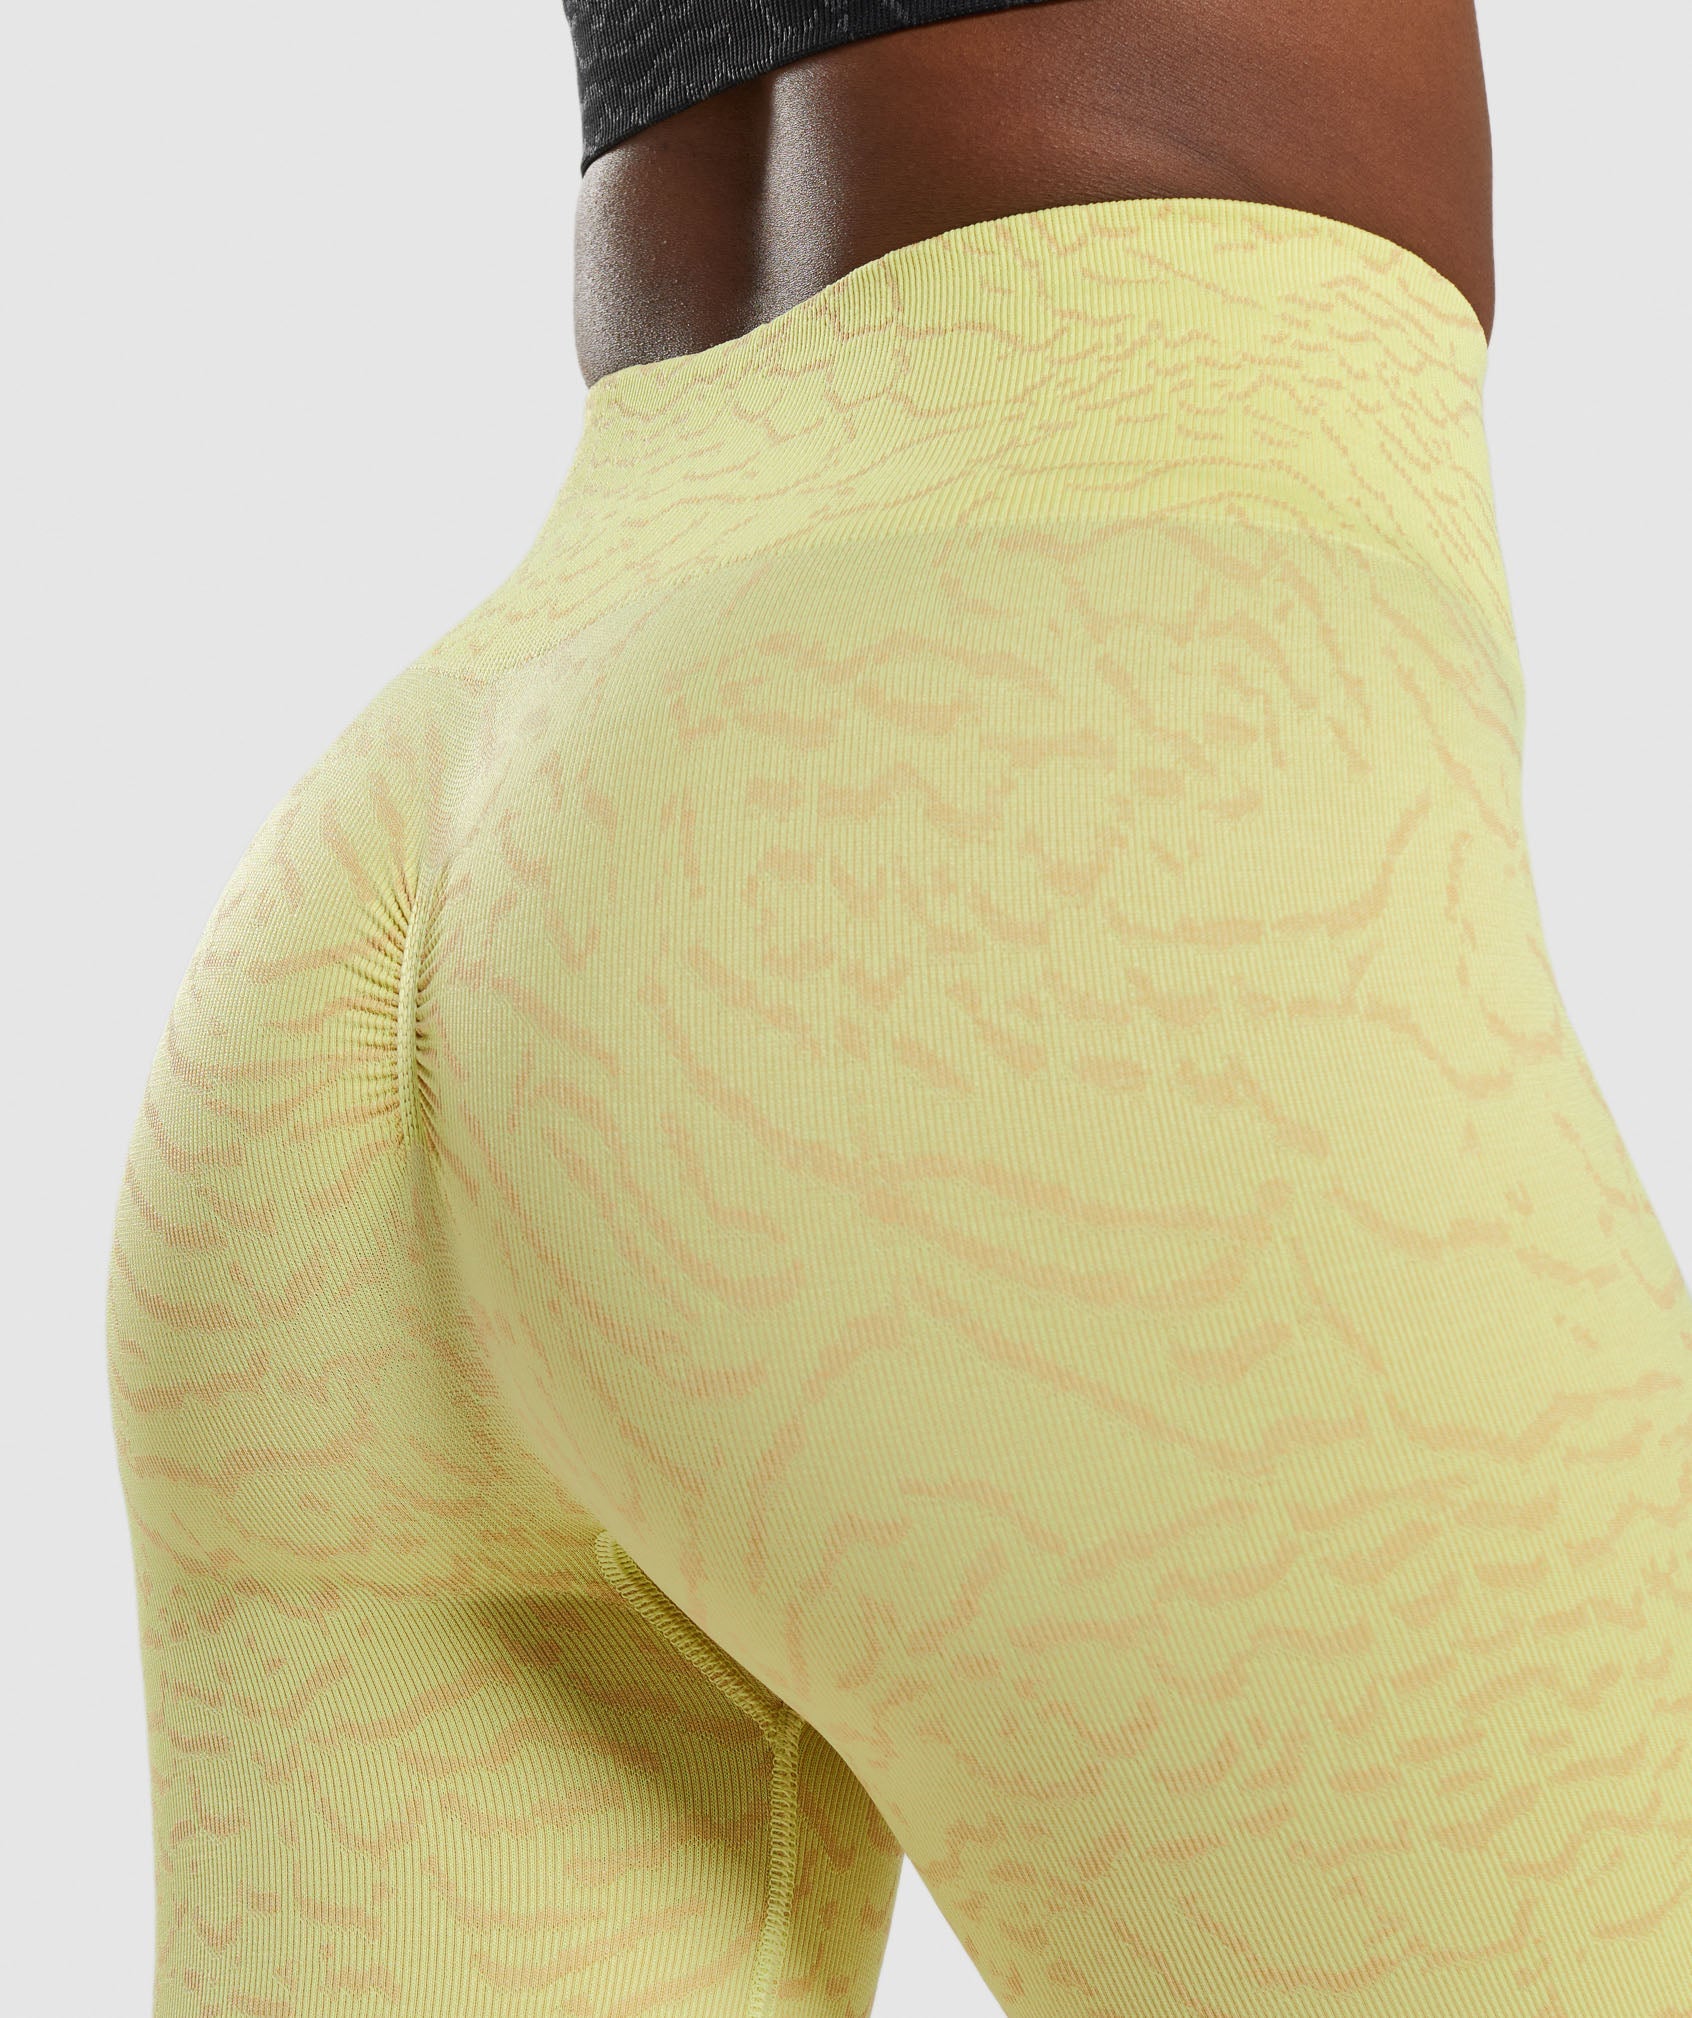 Adapt Animal Seamless Cycling Shorts in Hybrid | Firefly Yellow - view 6